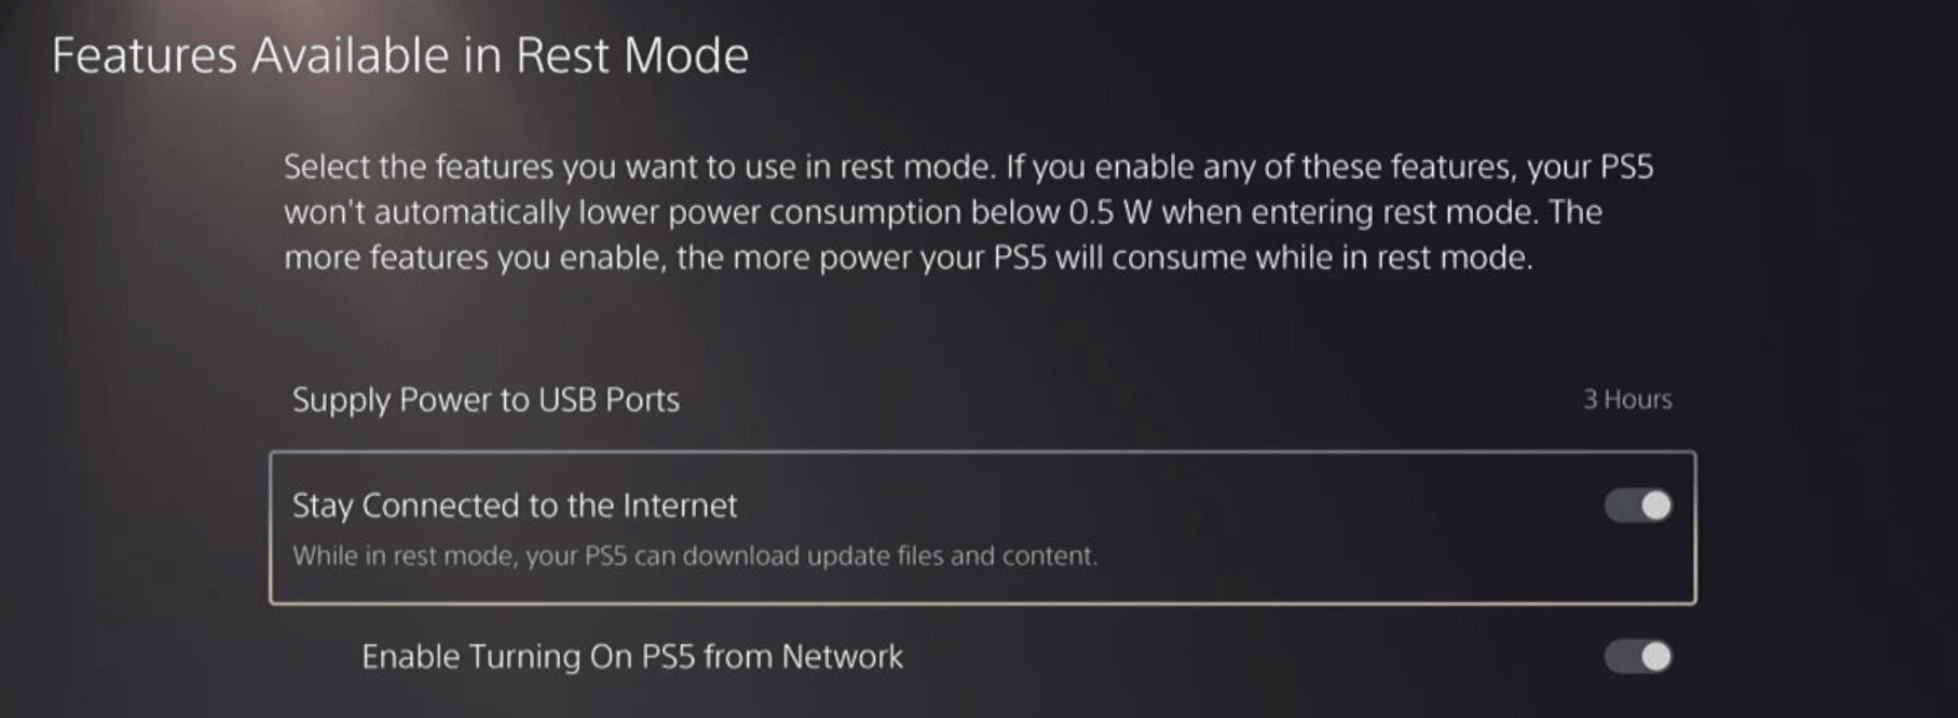 Stay Connected to the Internet is toggled in PS5 rest mode settings menu to enable automatic updates of Orten was the Case